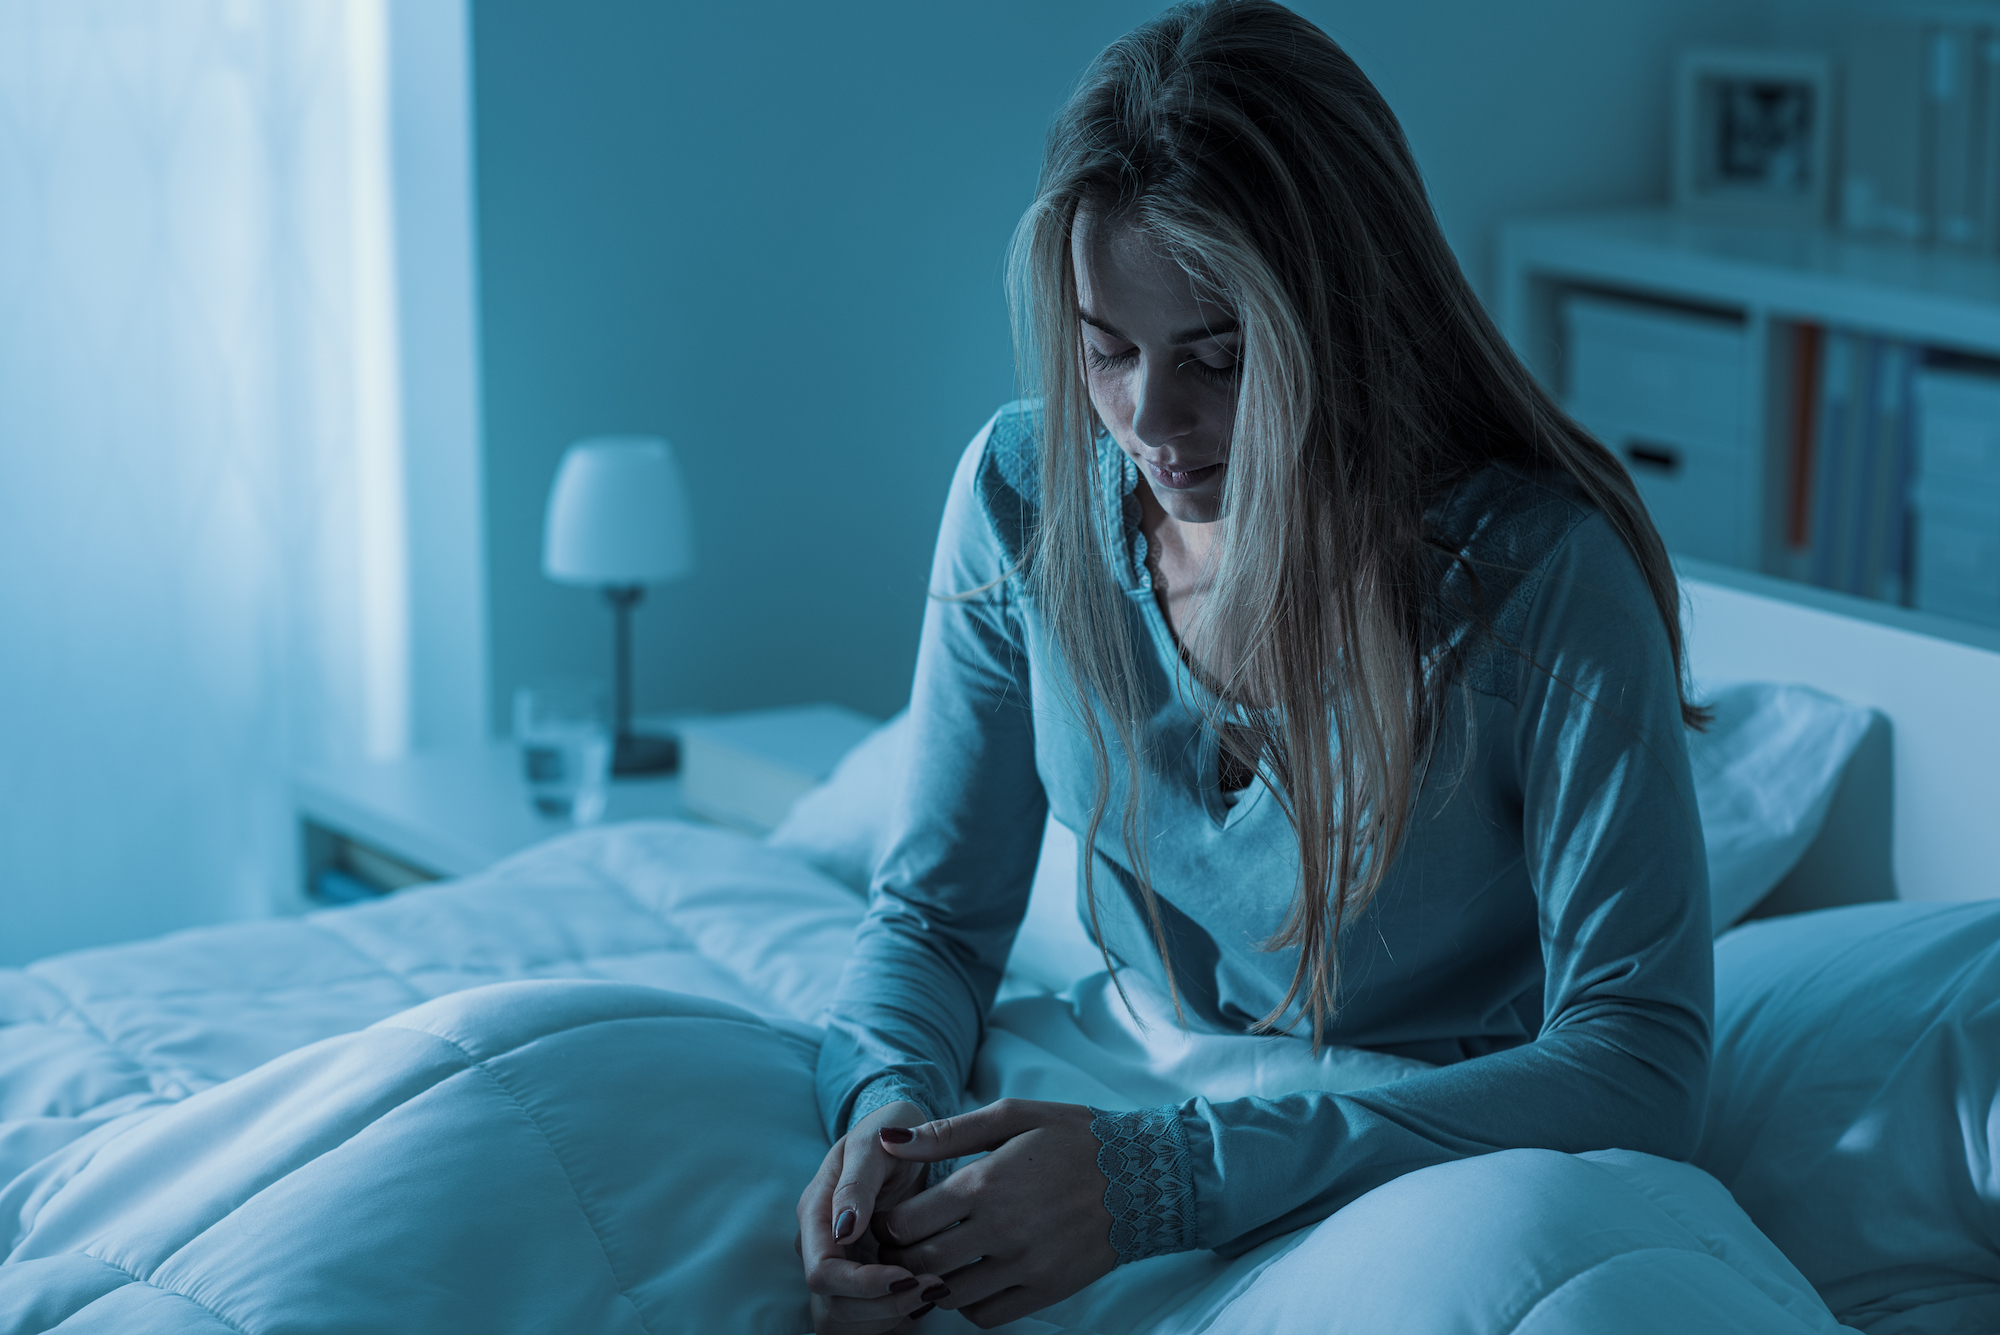 Depressed woman awake in the night, she is exhausted and suffering from insomnia